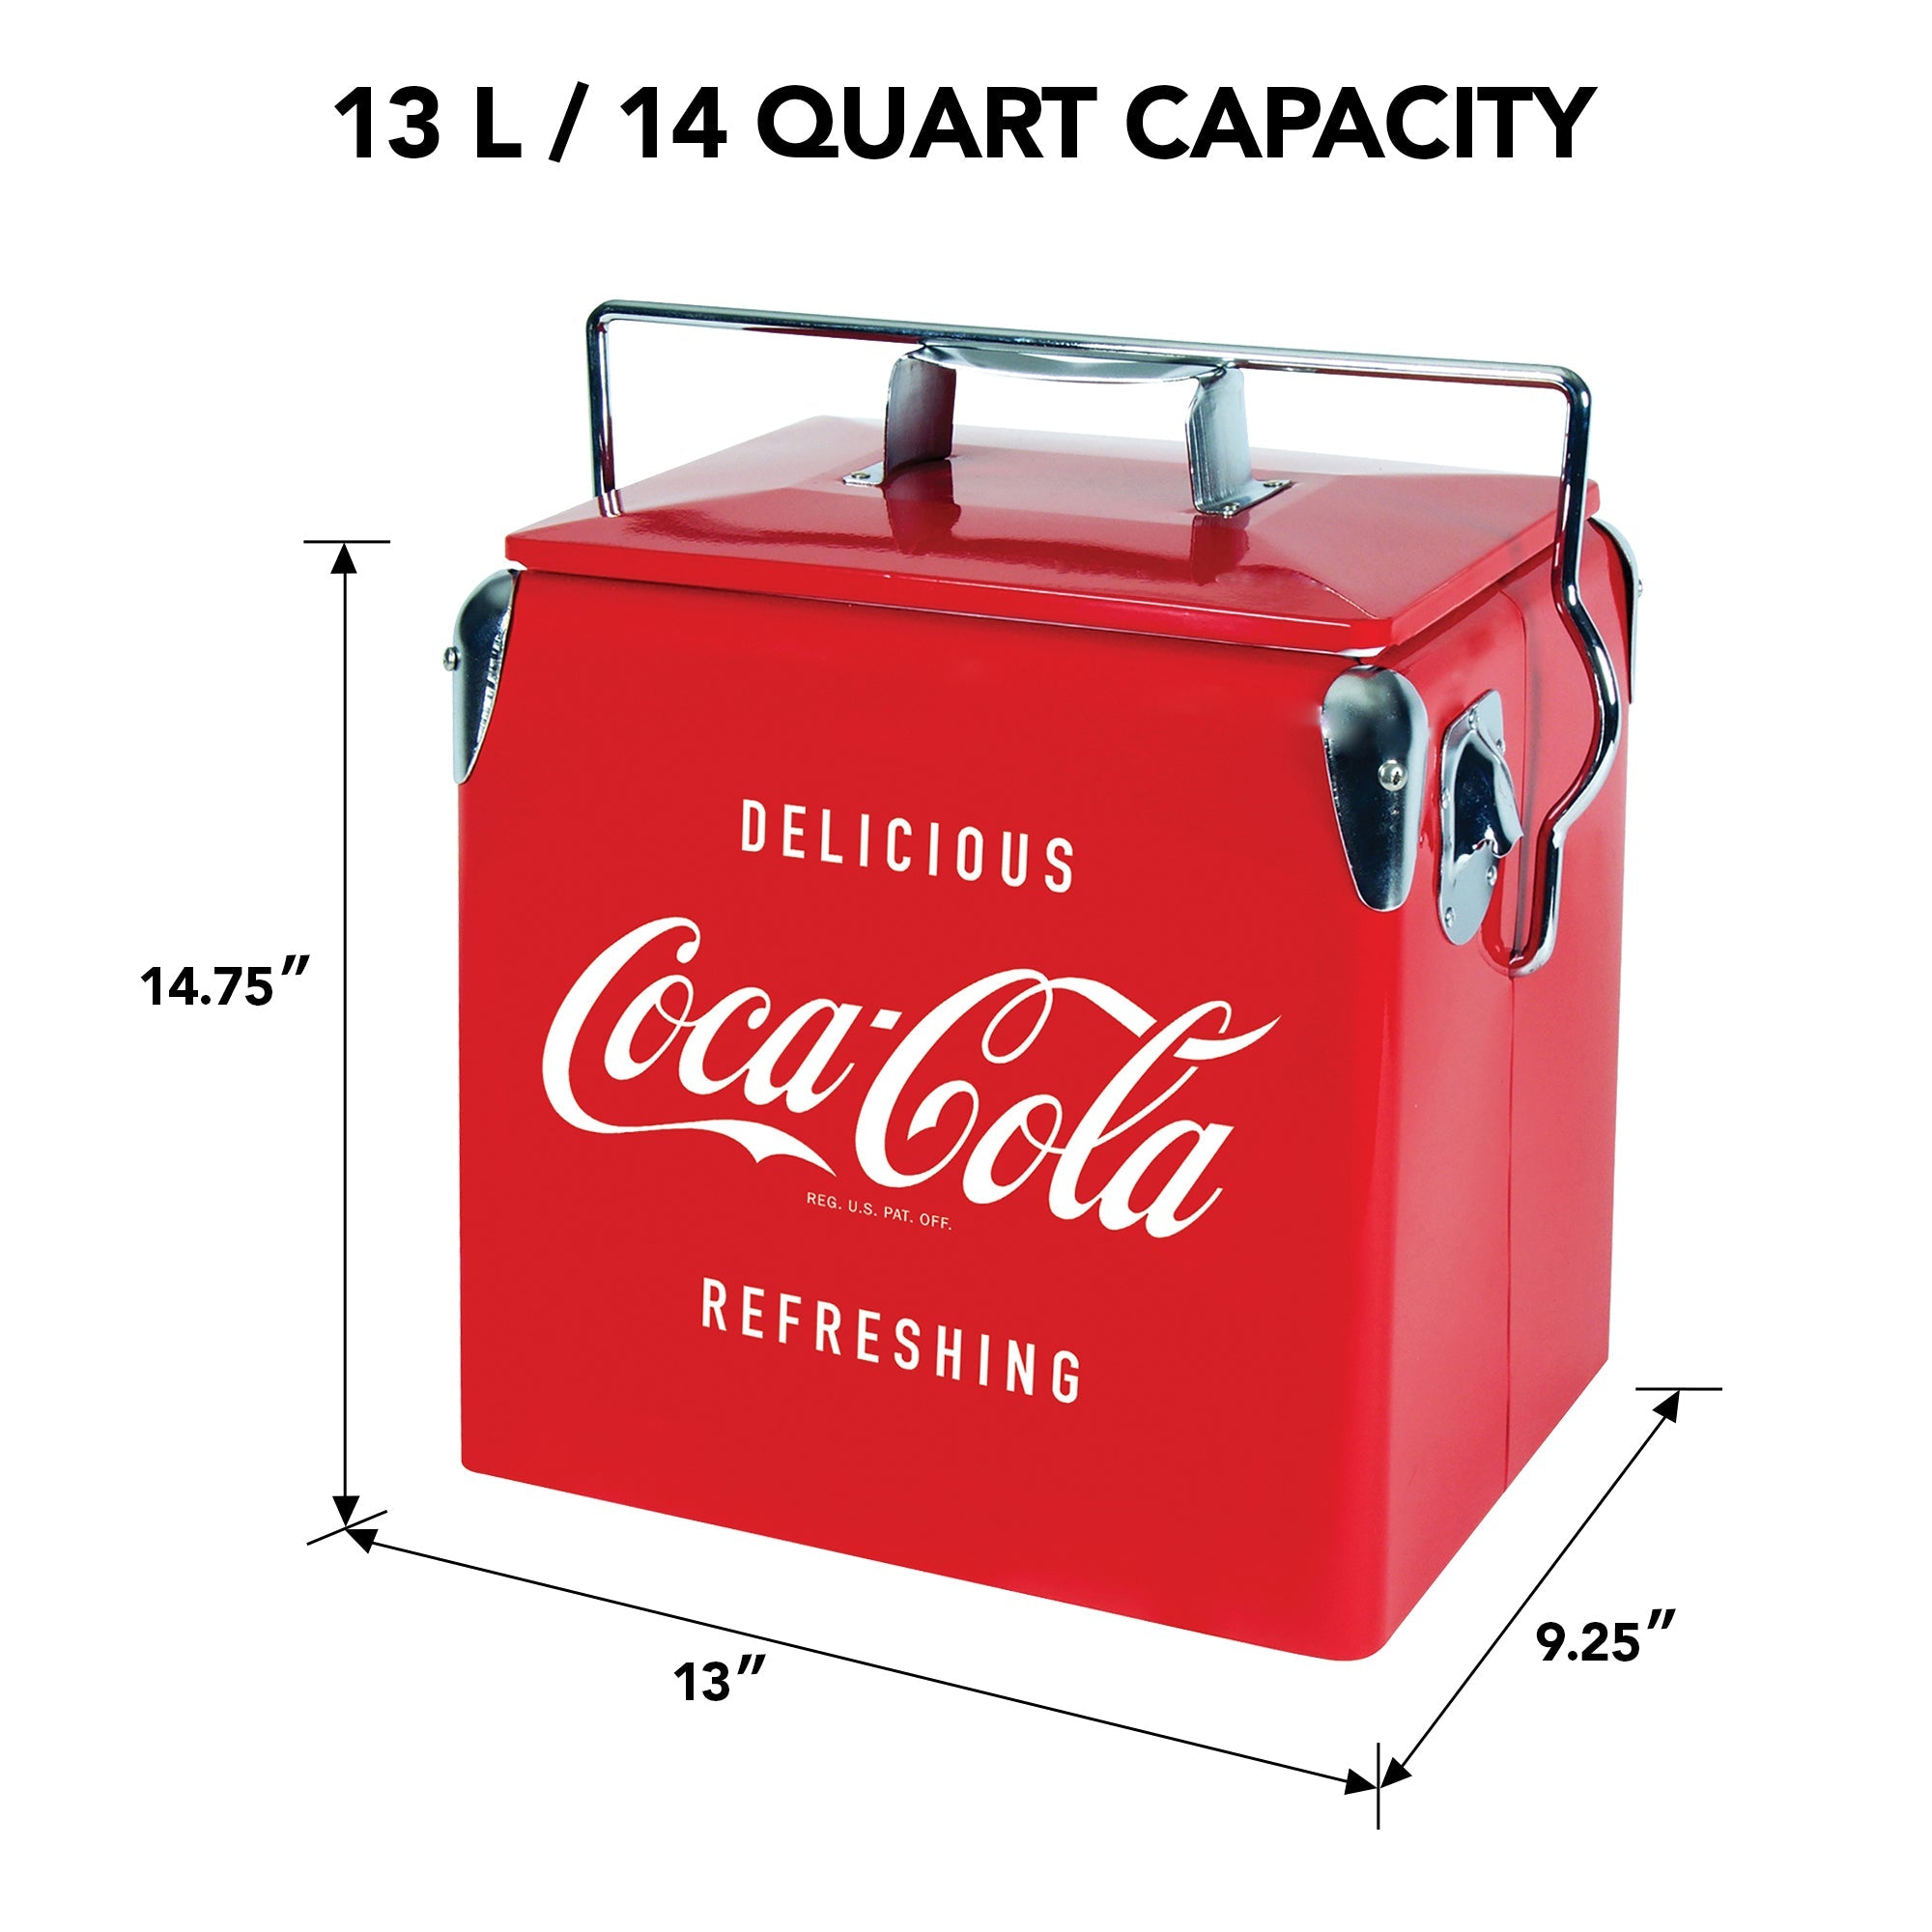 Product shot of Coca-Cola retro 14 liter ice chest with bottle opener, closed, on a white background, with dimensions labeled. Text above reads, "13L/14 quart capacity"